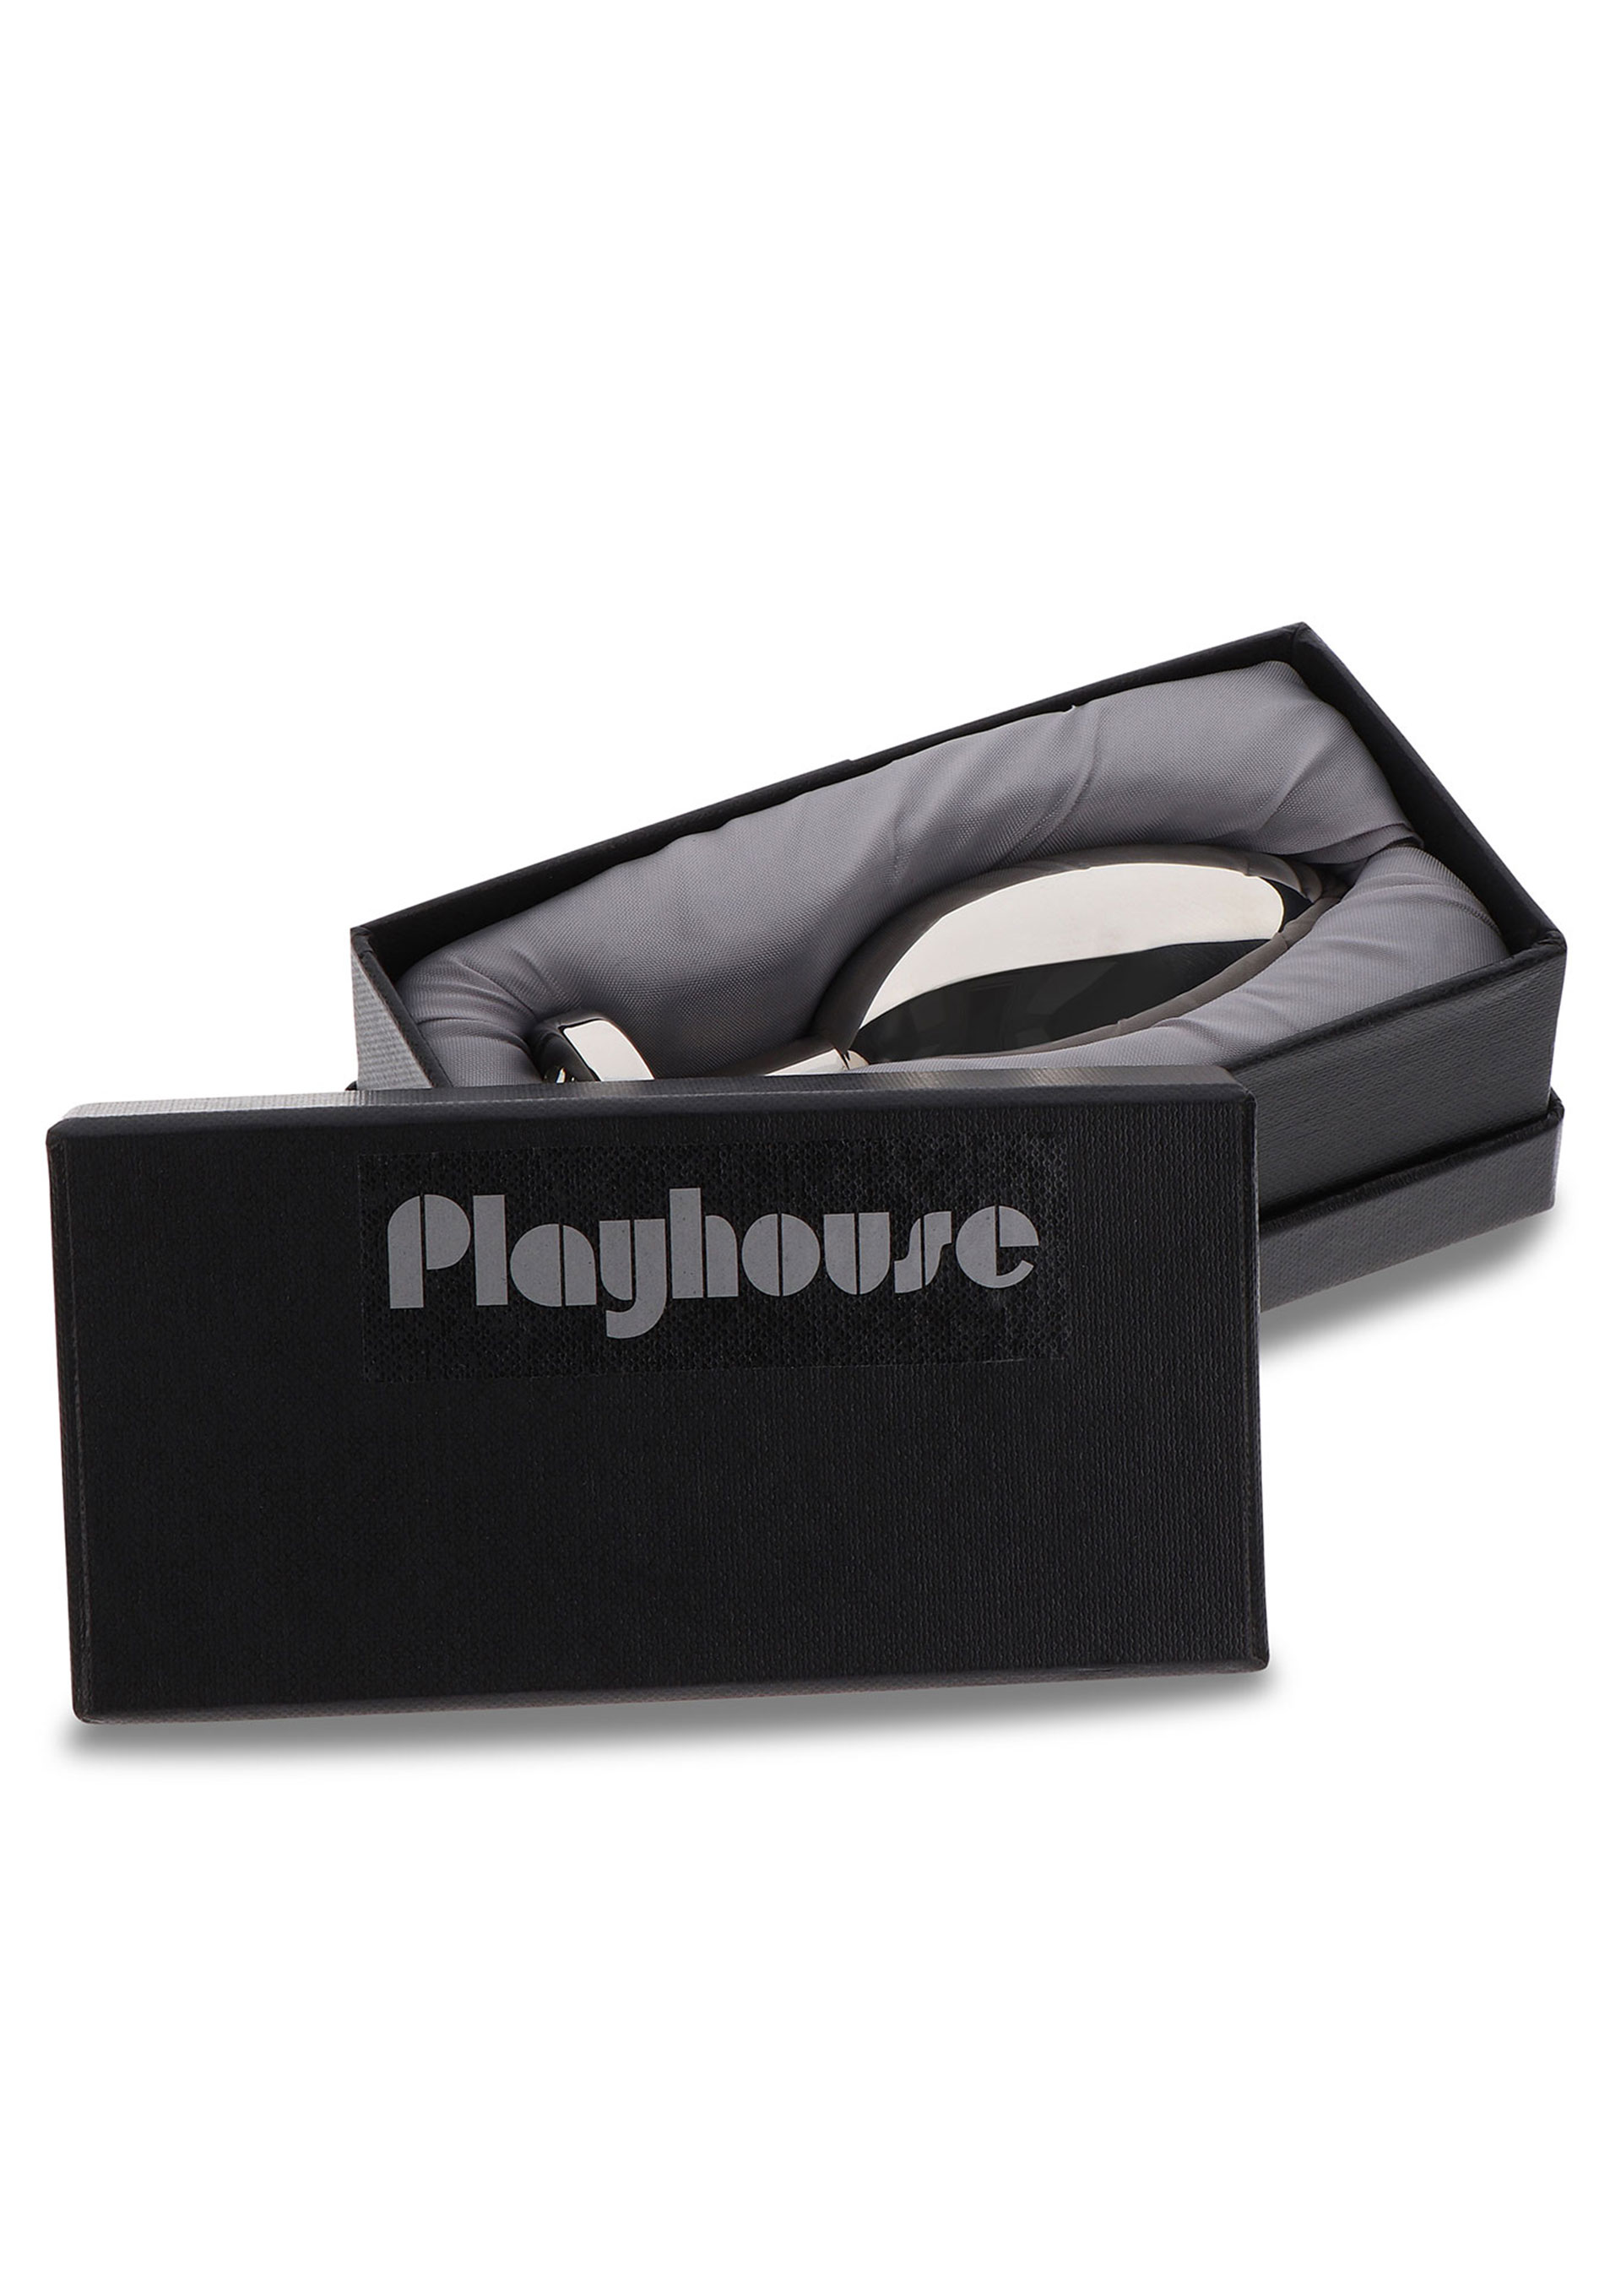 Playhouse - Weighted Steel Butt Plug - L